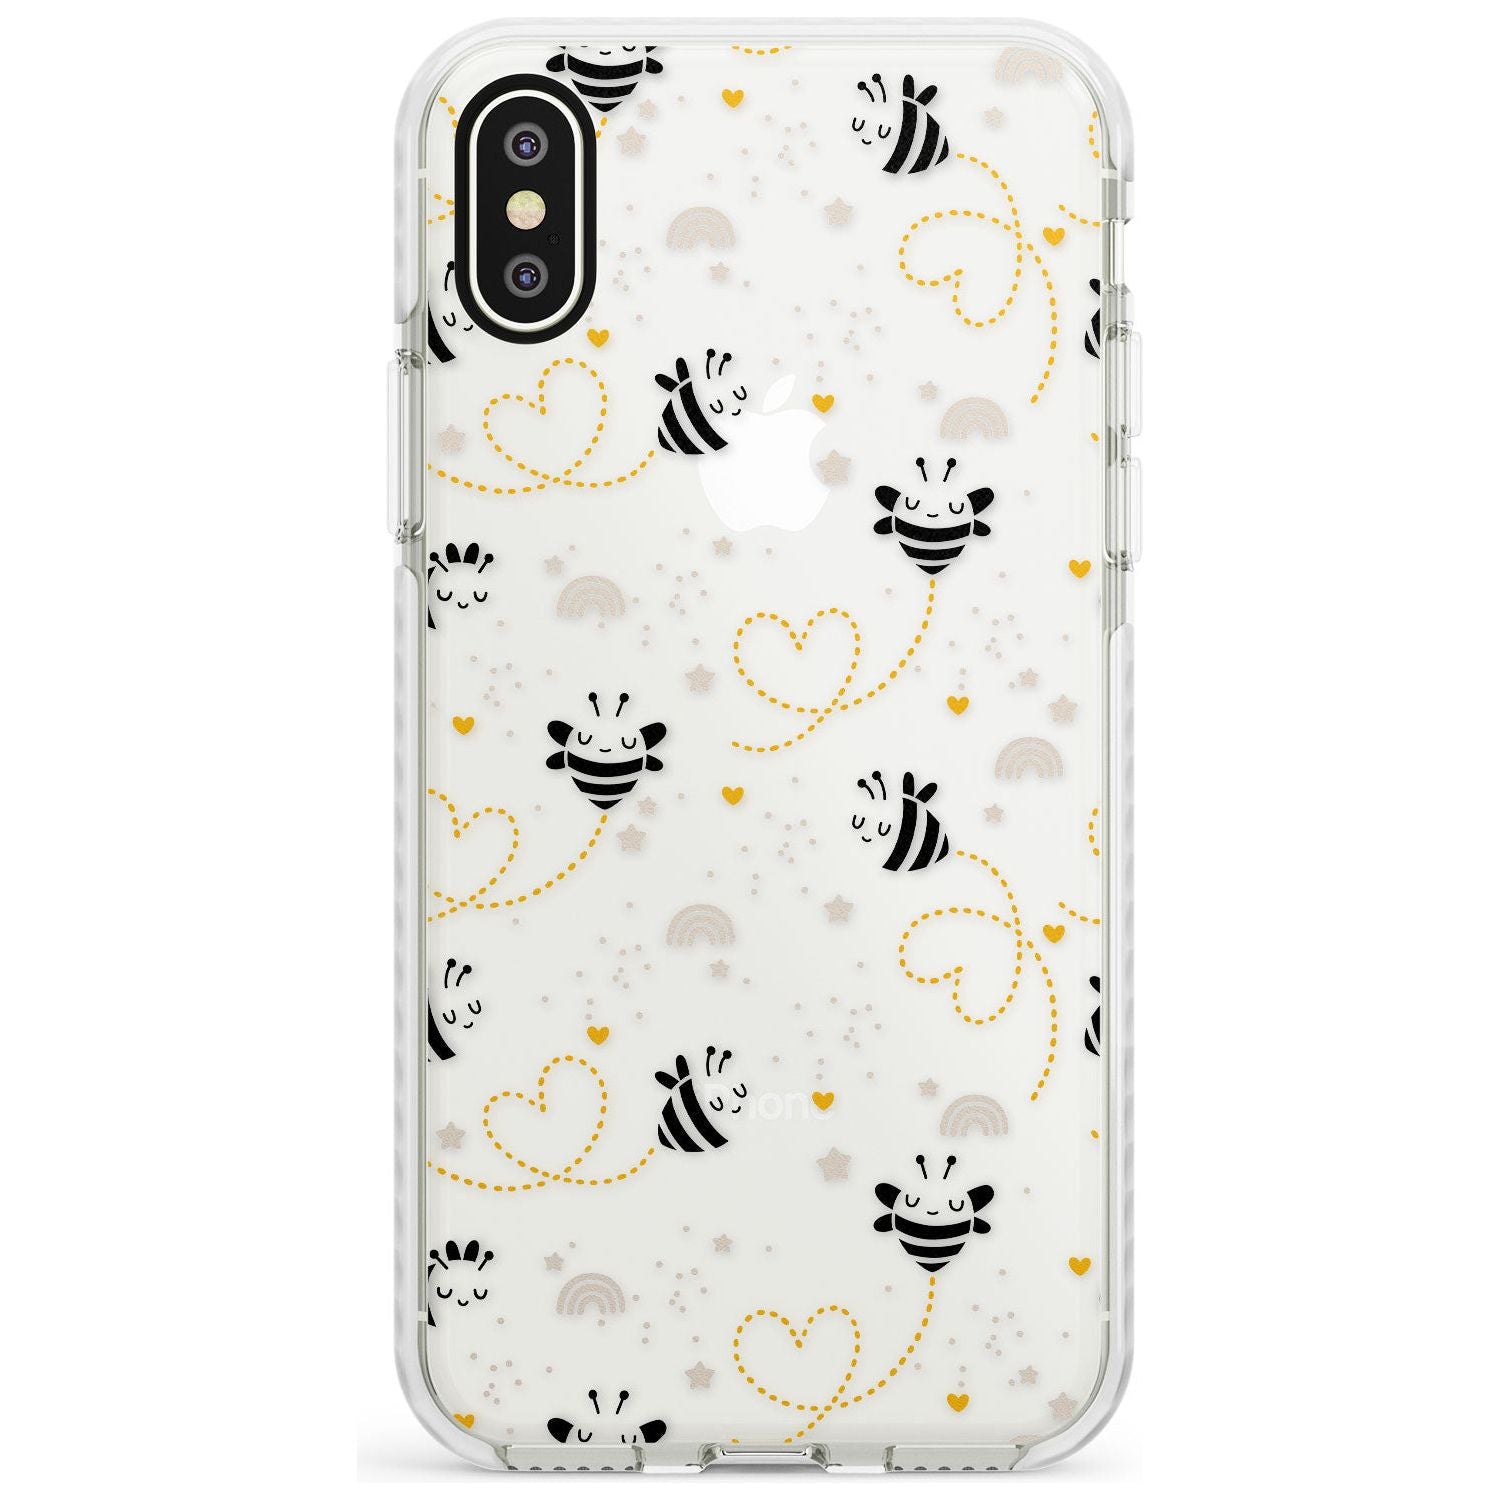 Sweet as Honey Patterns: Bees & Hearts (Clear) Impact Phone Case for iPhone X XS Max XR